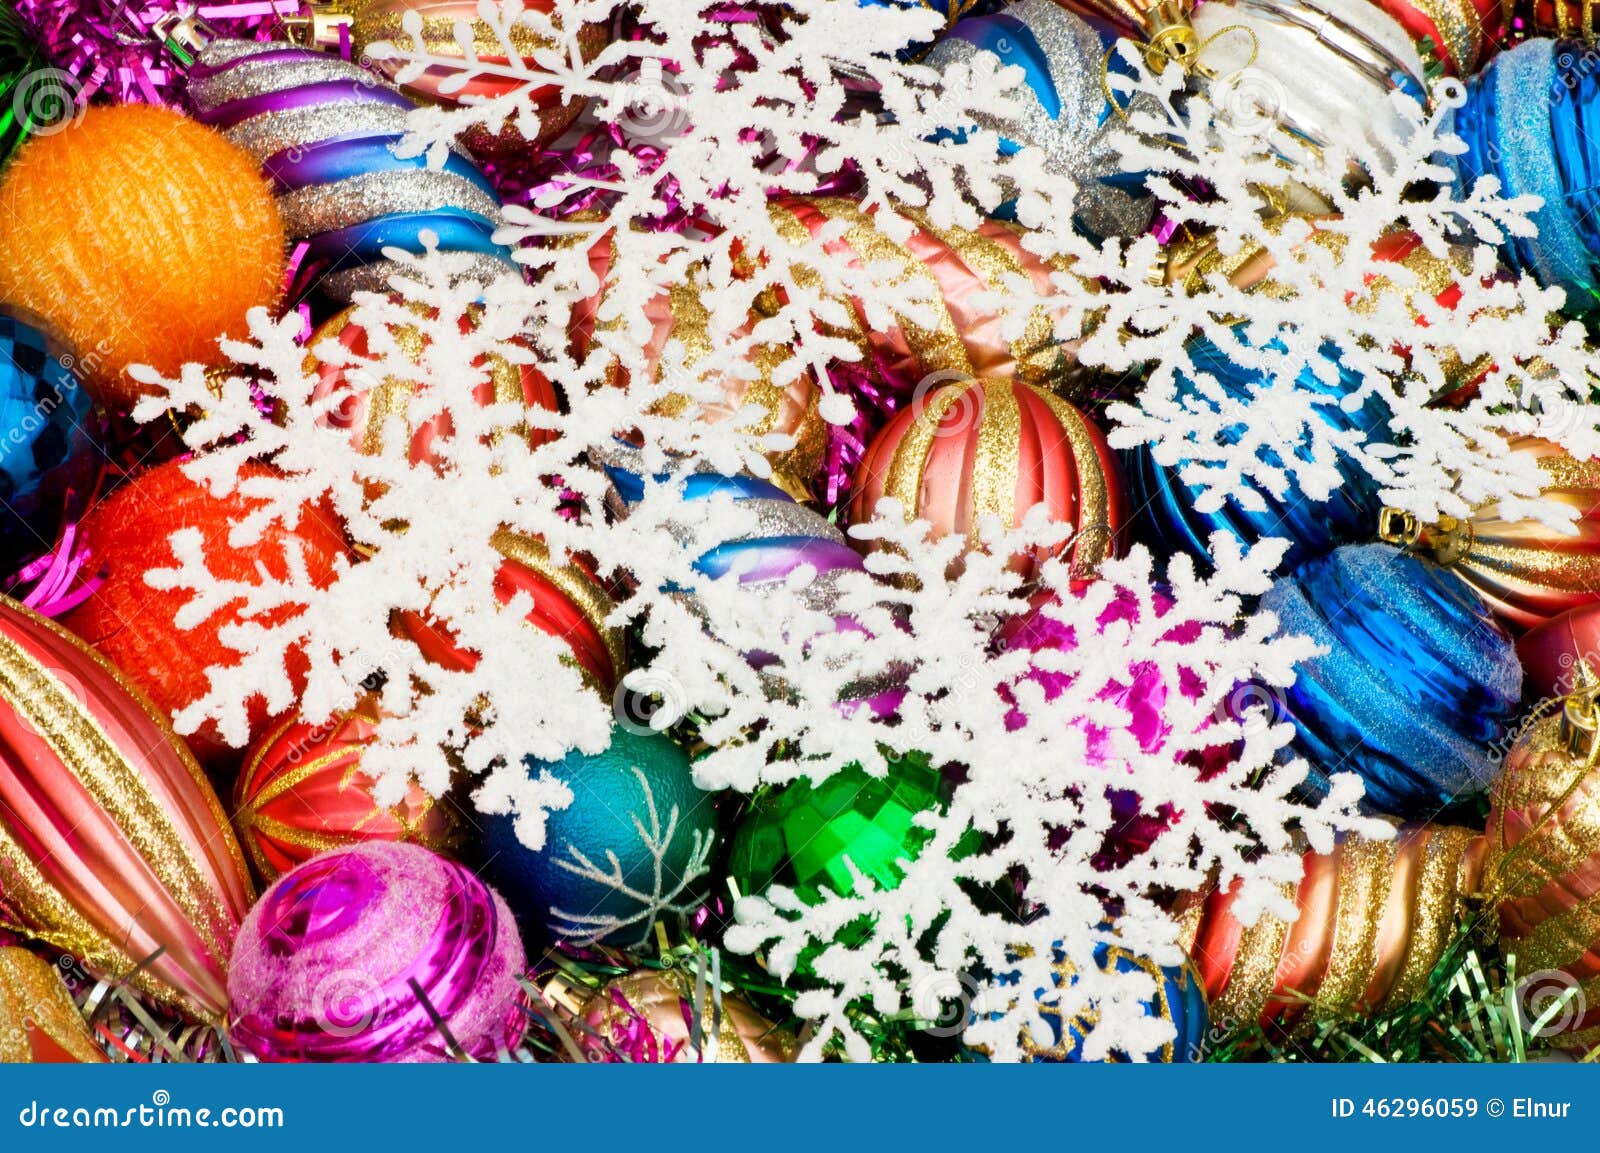 Christmas Decorations in Festive Stock Image - Image of christmas ...